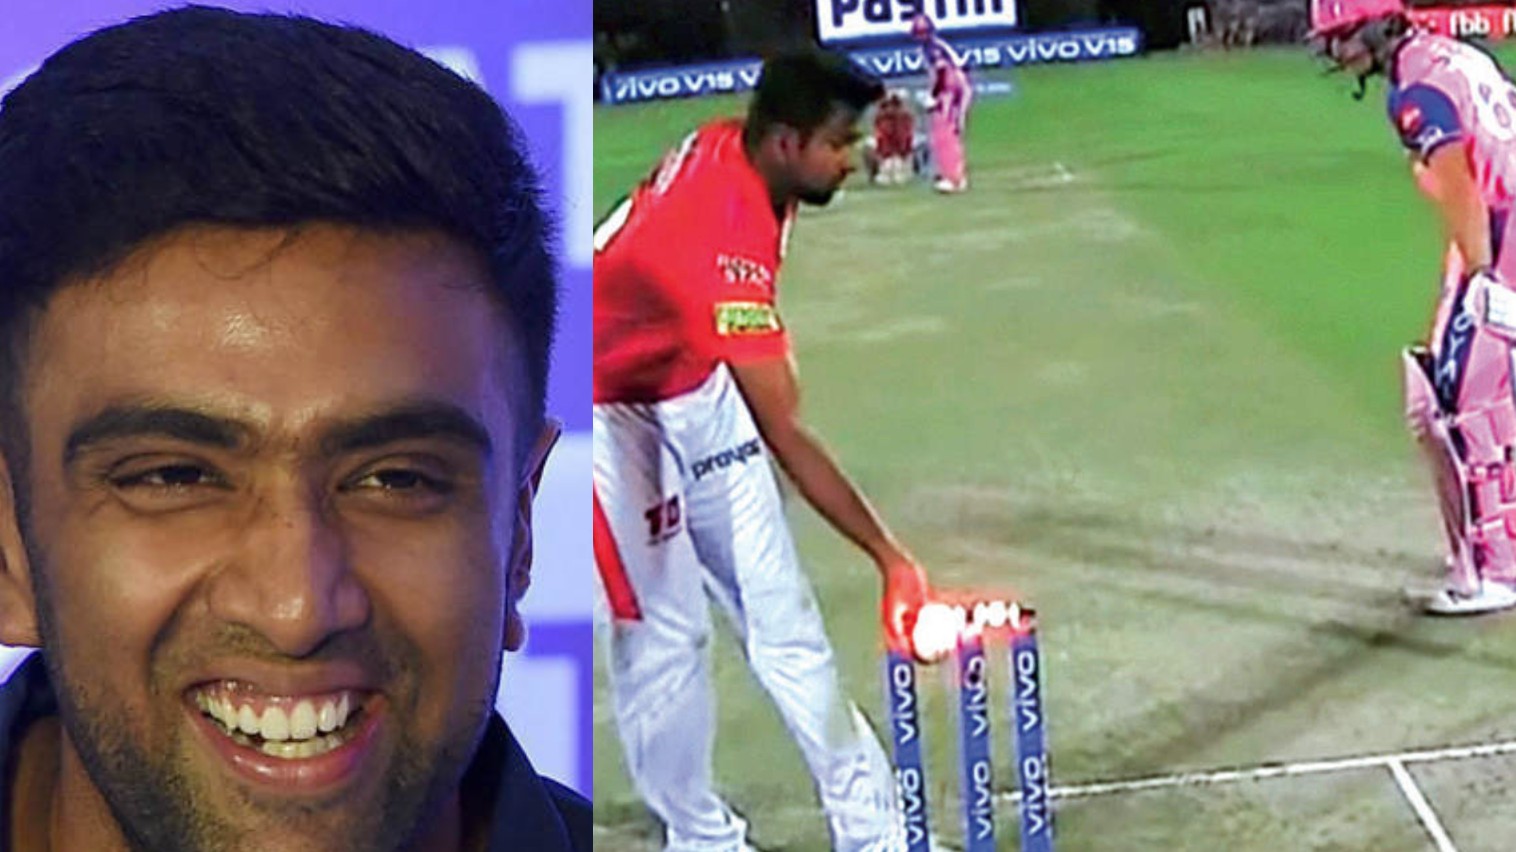 “If a batsman gets out, team get docked 5 runs,” Ashwin suggests a ‘free ball’ option in place of mankading